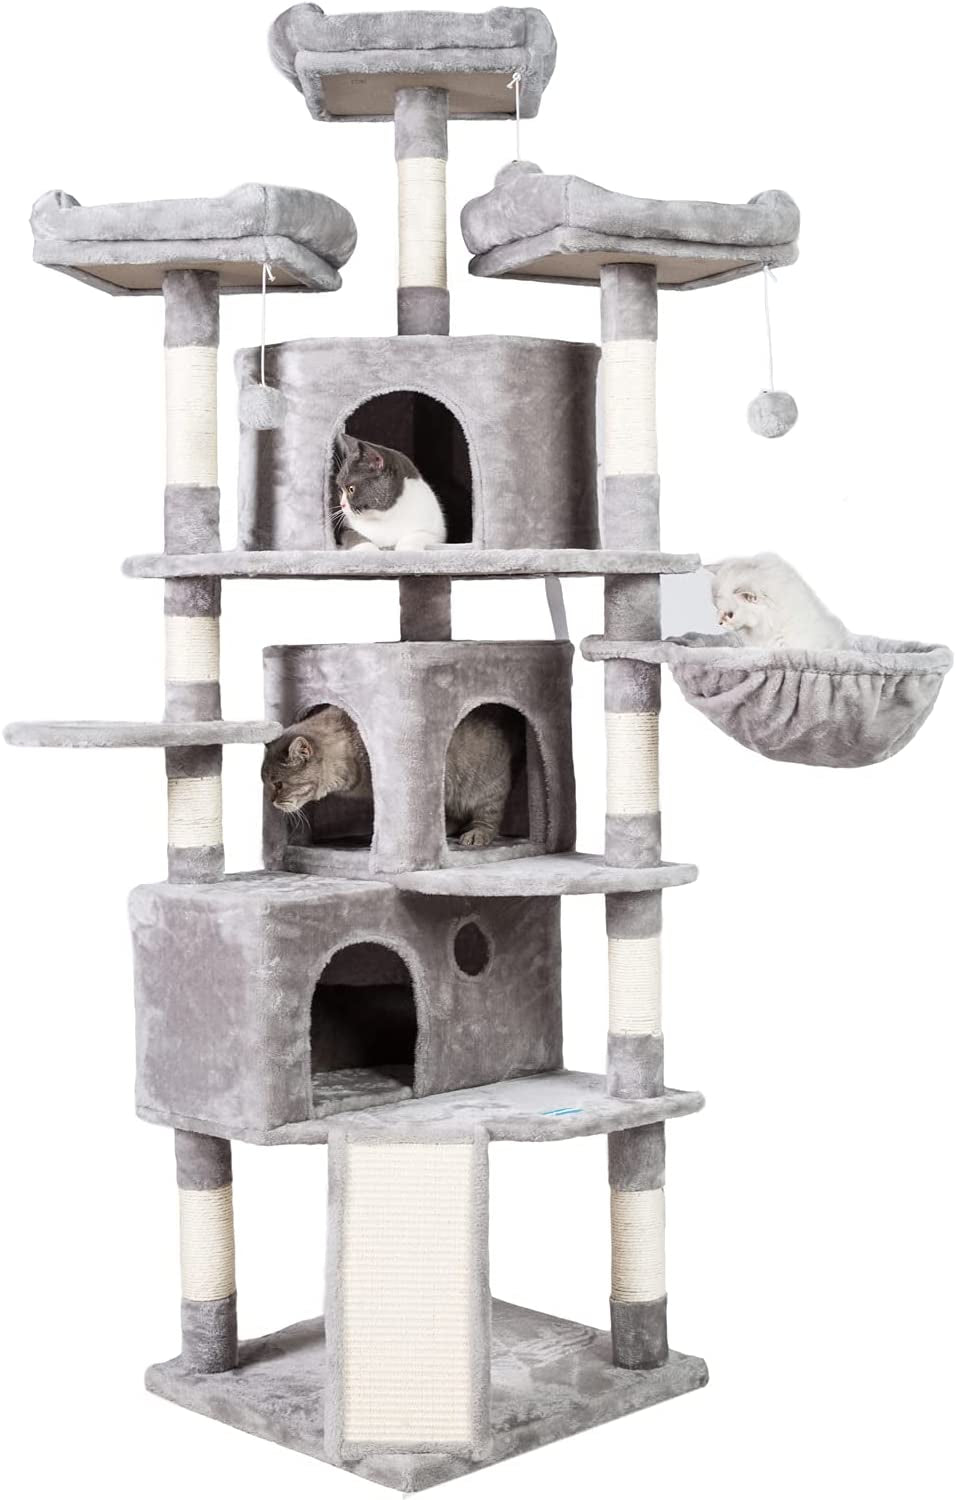 XL Size Cat Tree, Cat Tower with 3 Caves, 3 Cozy Perches, Scratching Posts, Board, Activity Center Stable for Kitten/Gig Cat